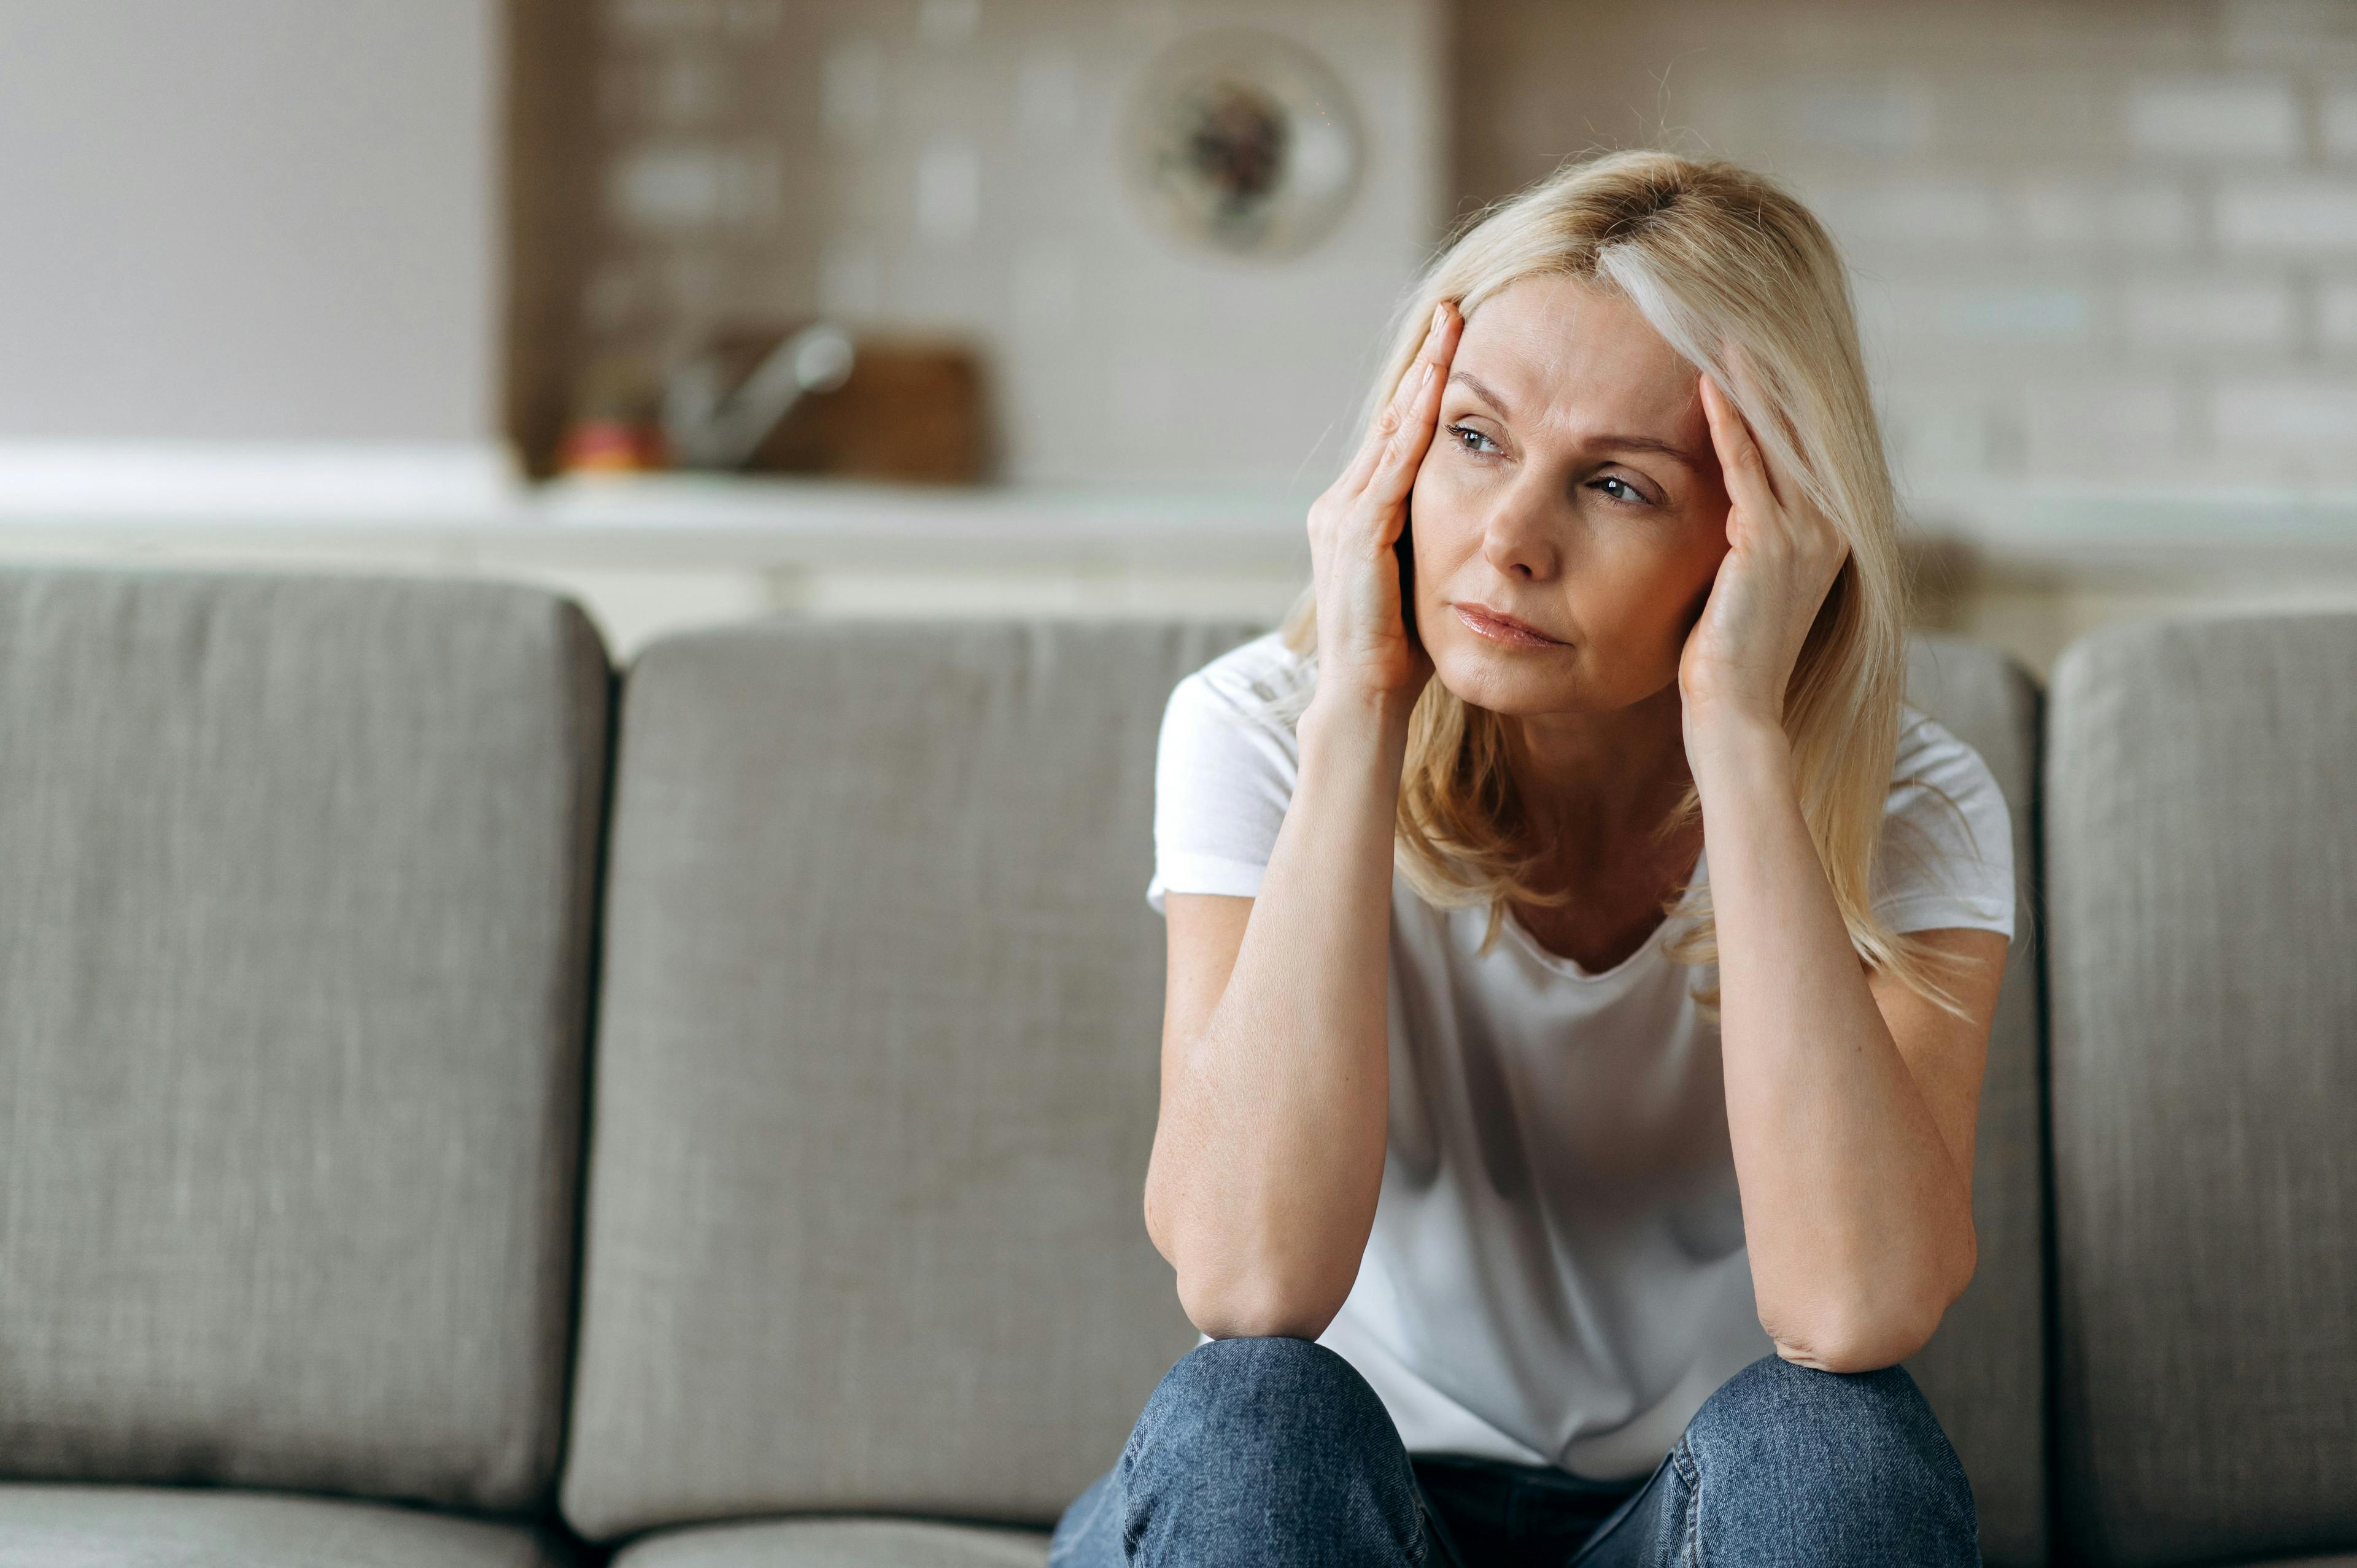 Scoping Review Reveals Effects of COVID-19 on Peri- and Post-Menopausal Women